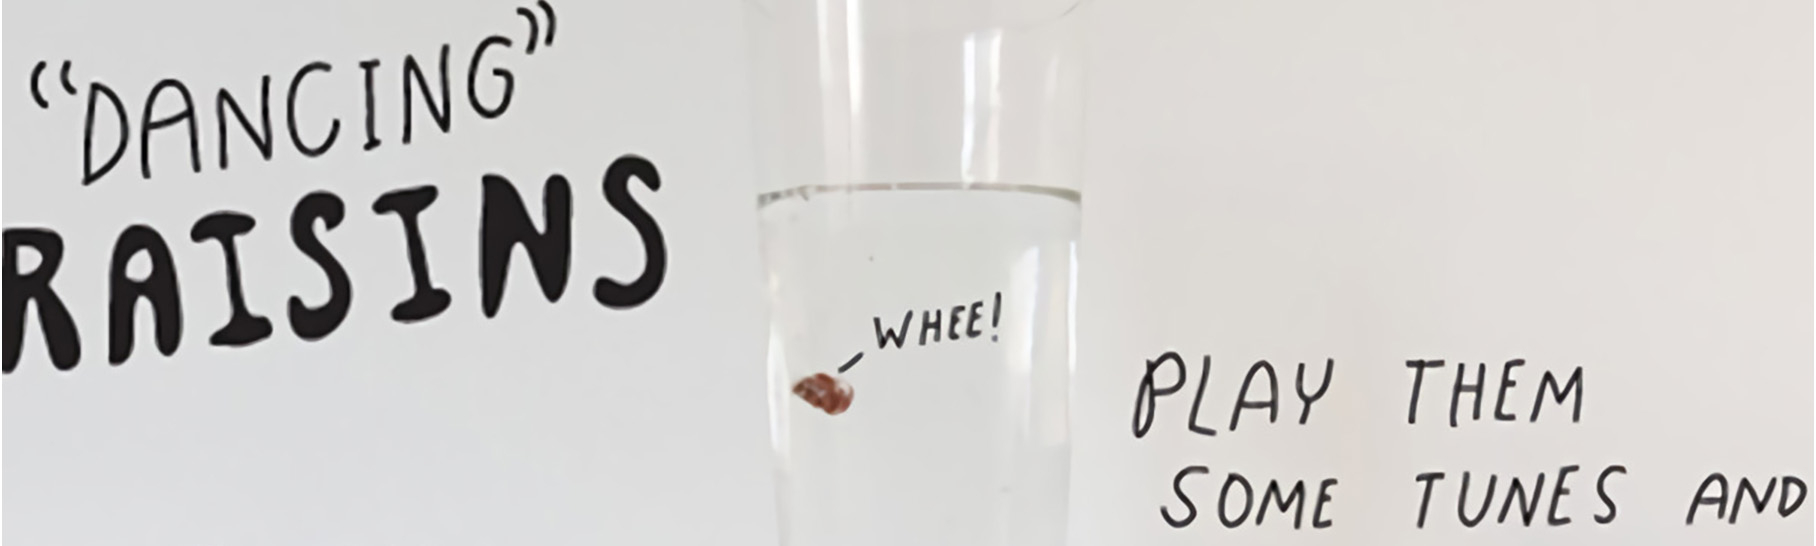 A glass with clear liquid and a raisin inside. Text beside the raisin says “whee.” The text around the glass says “presenting dancing raisins” and “I’m ready to bust a move on the dance floor” with a line pointing to a raisin. Additional text says “Play them some tunes and let density do the rest.”